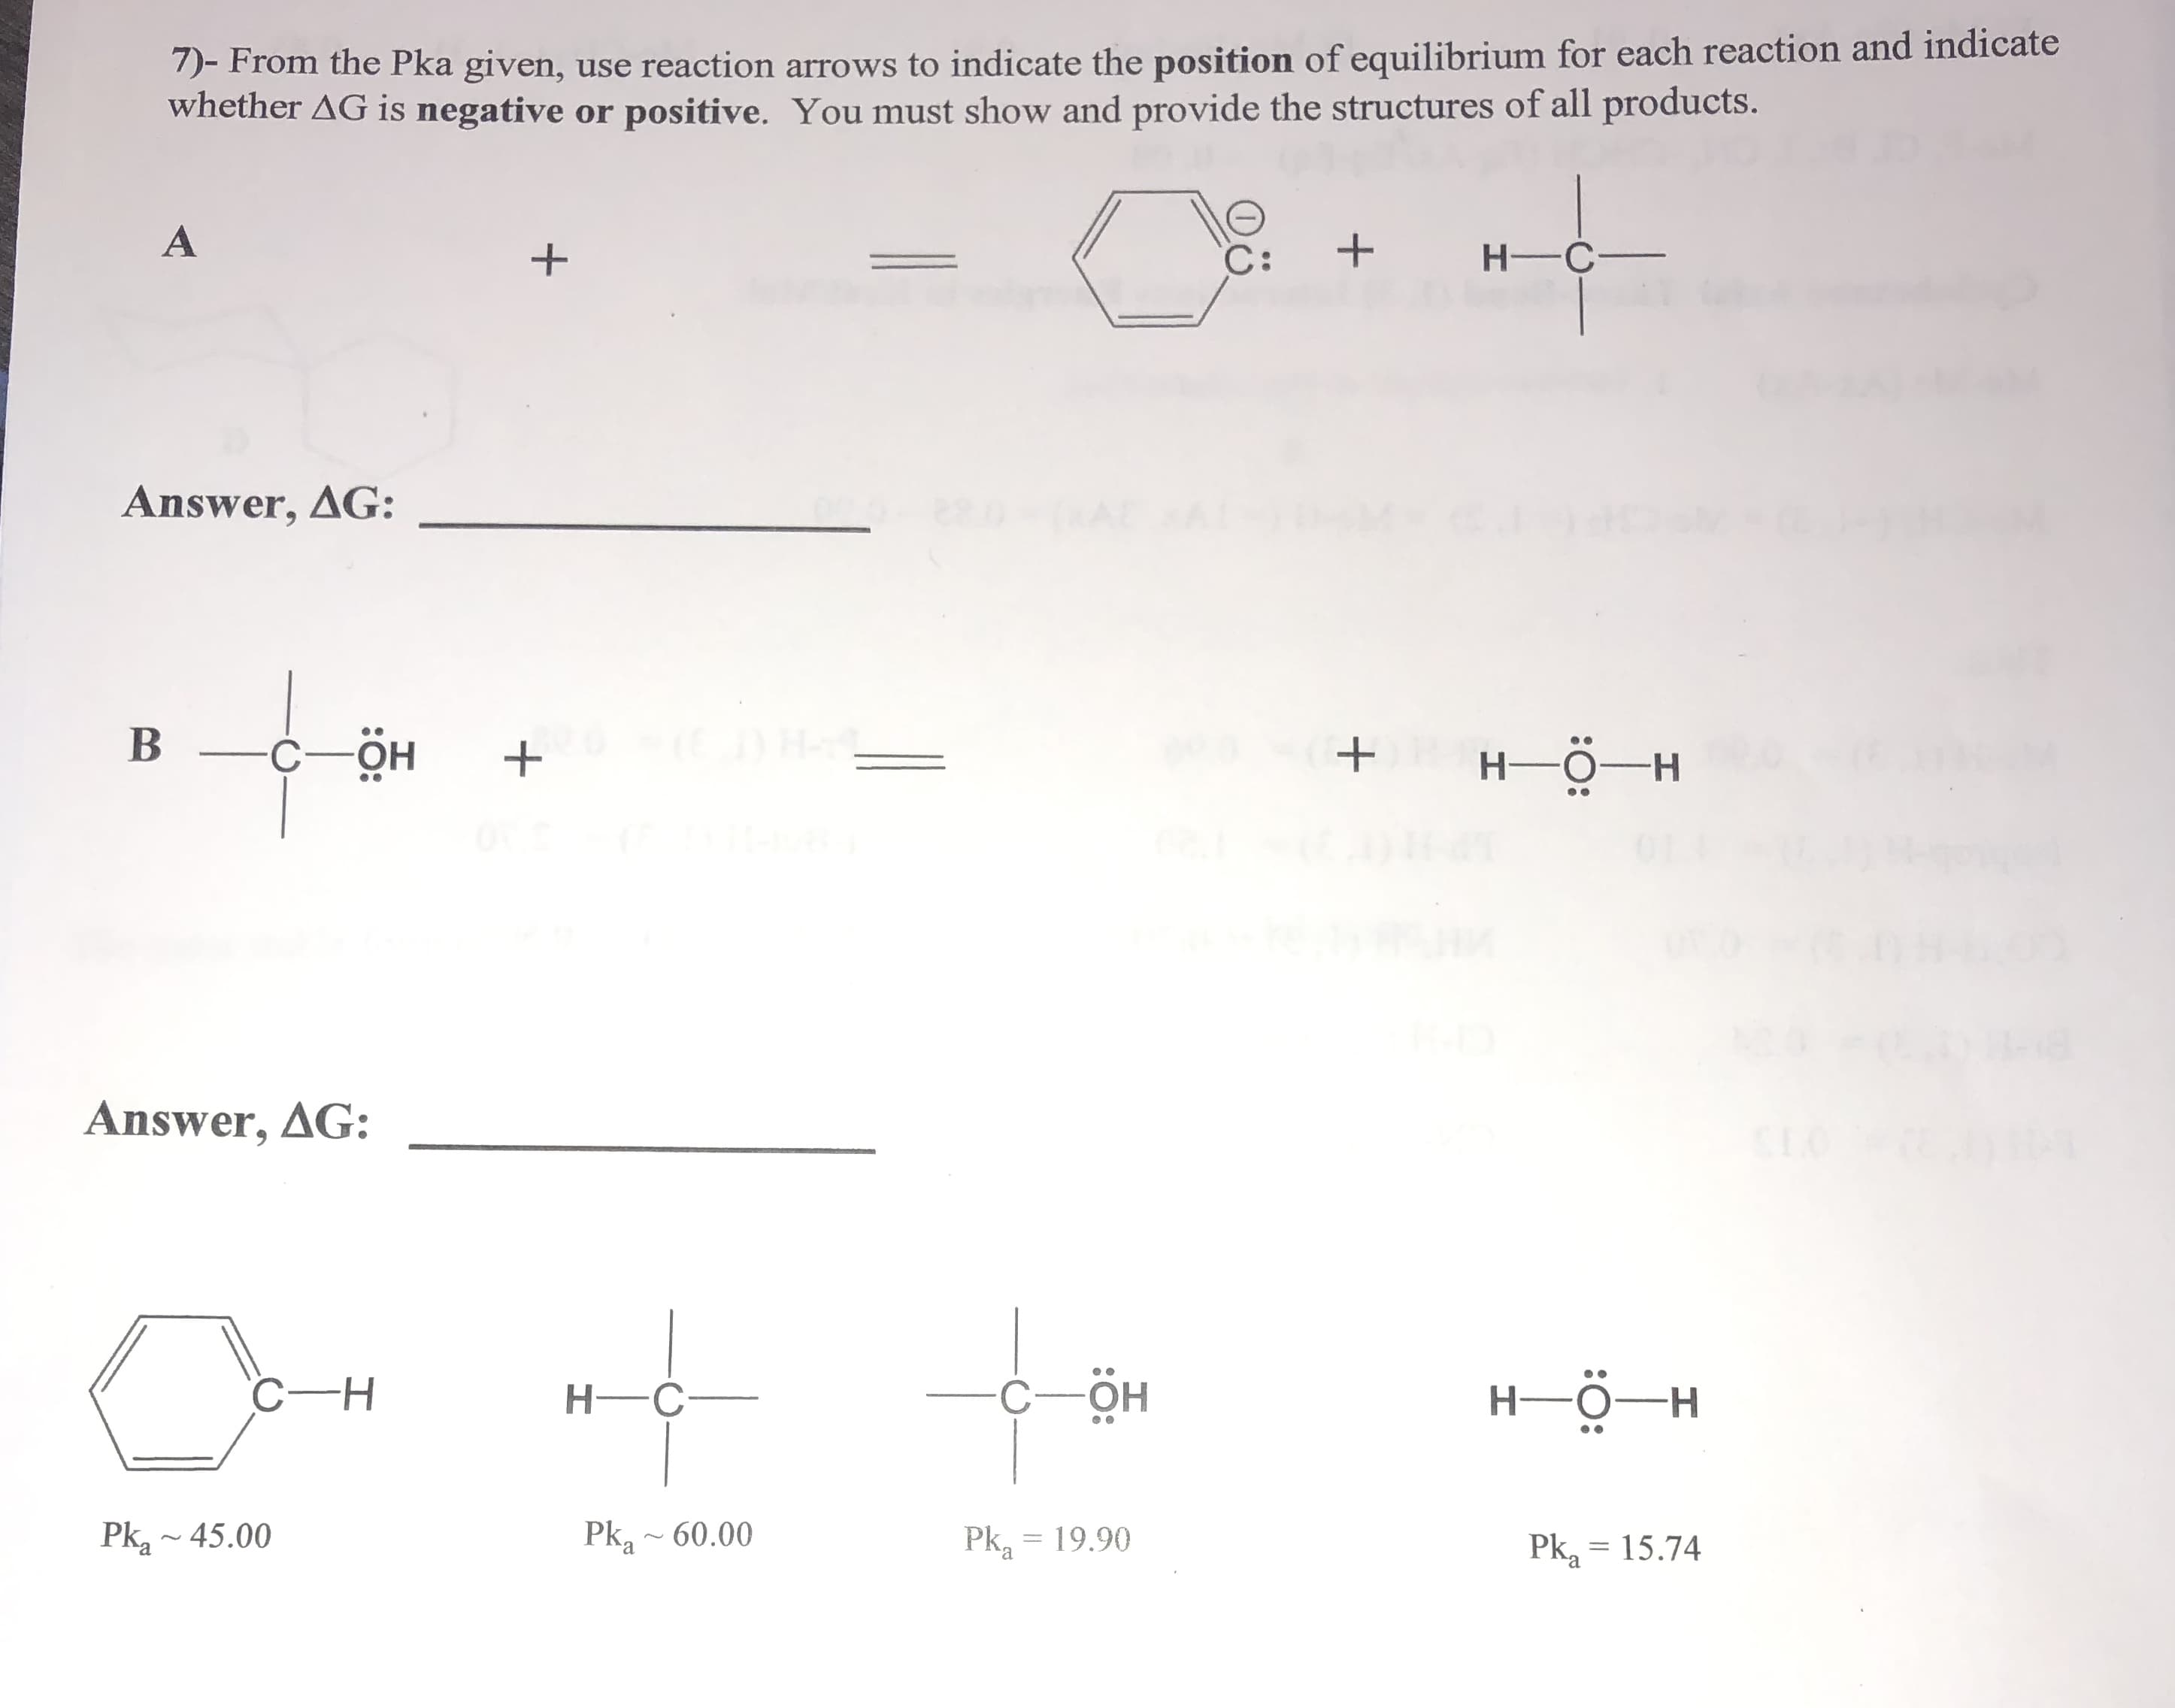 7)- From the Pka given, use reaction arrows to indicate the position of equilibrium for each reaction and indicate
whether ΔG 1s negative or positive. You must show and provide the structures of all products.
H-C
Answer, AG:
Η-Ο-Η
Answer, ΔG:
C-H
HC
OH
HO-H
Pk~45.00
Pka-60.00
Pka 19.90
Pka 15.74
